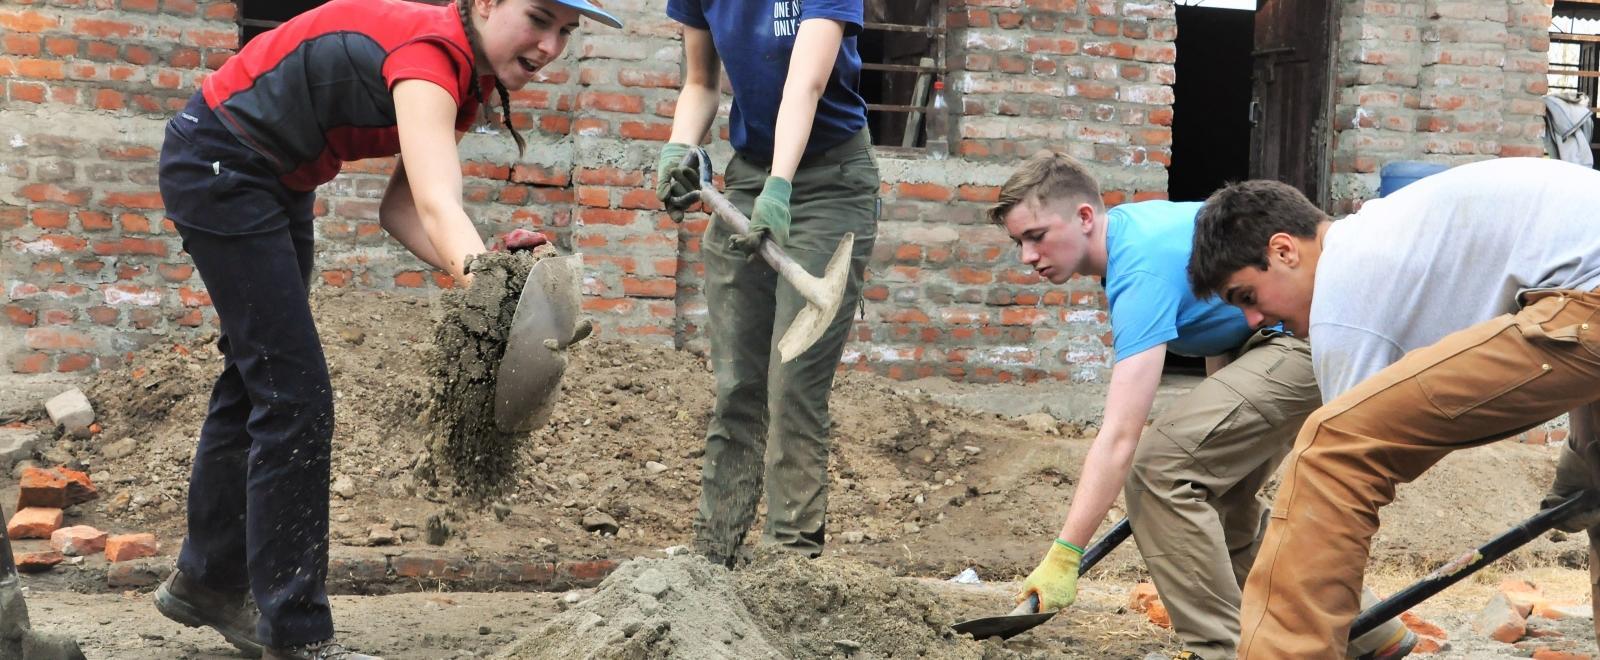 Volunteers in Nepal dig up sand for cement to help rebuild schools as part of their construction volunteer project.